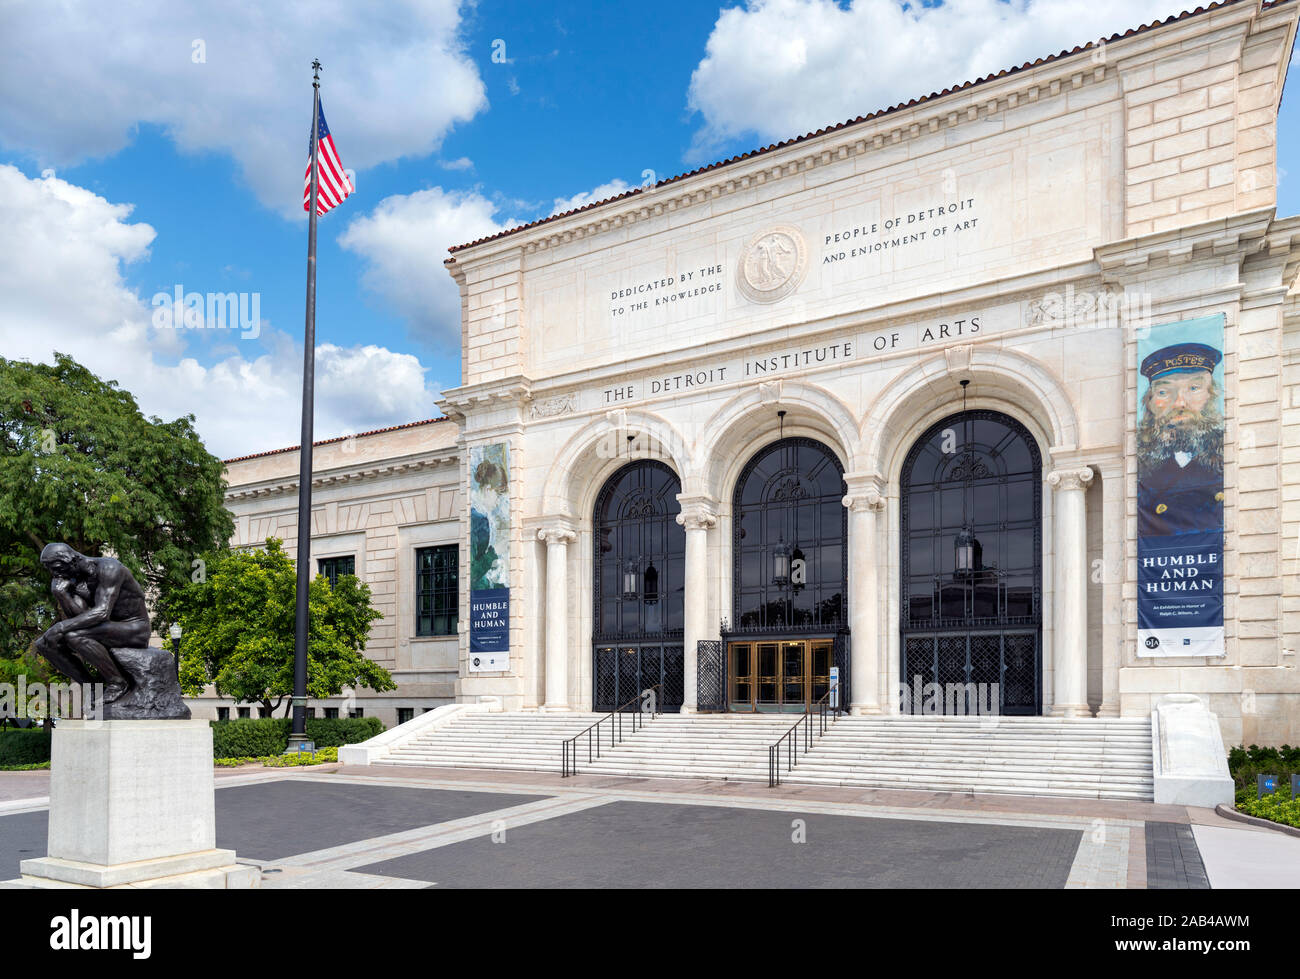 Entrance to the Detroit Institute of Arts, Detroit, Michigan, USA Stock Photo